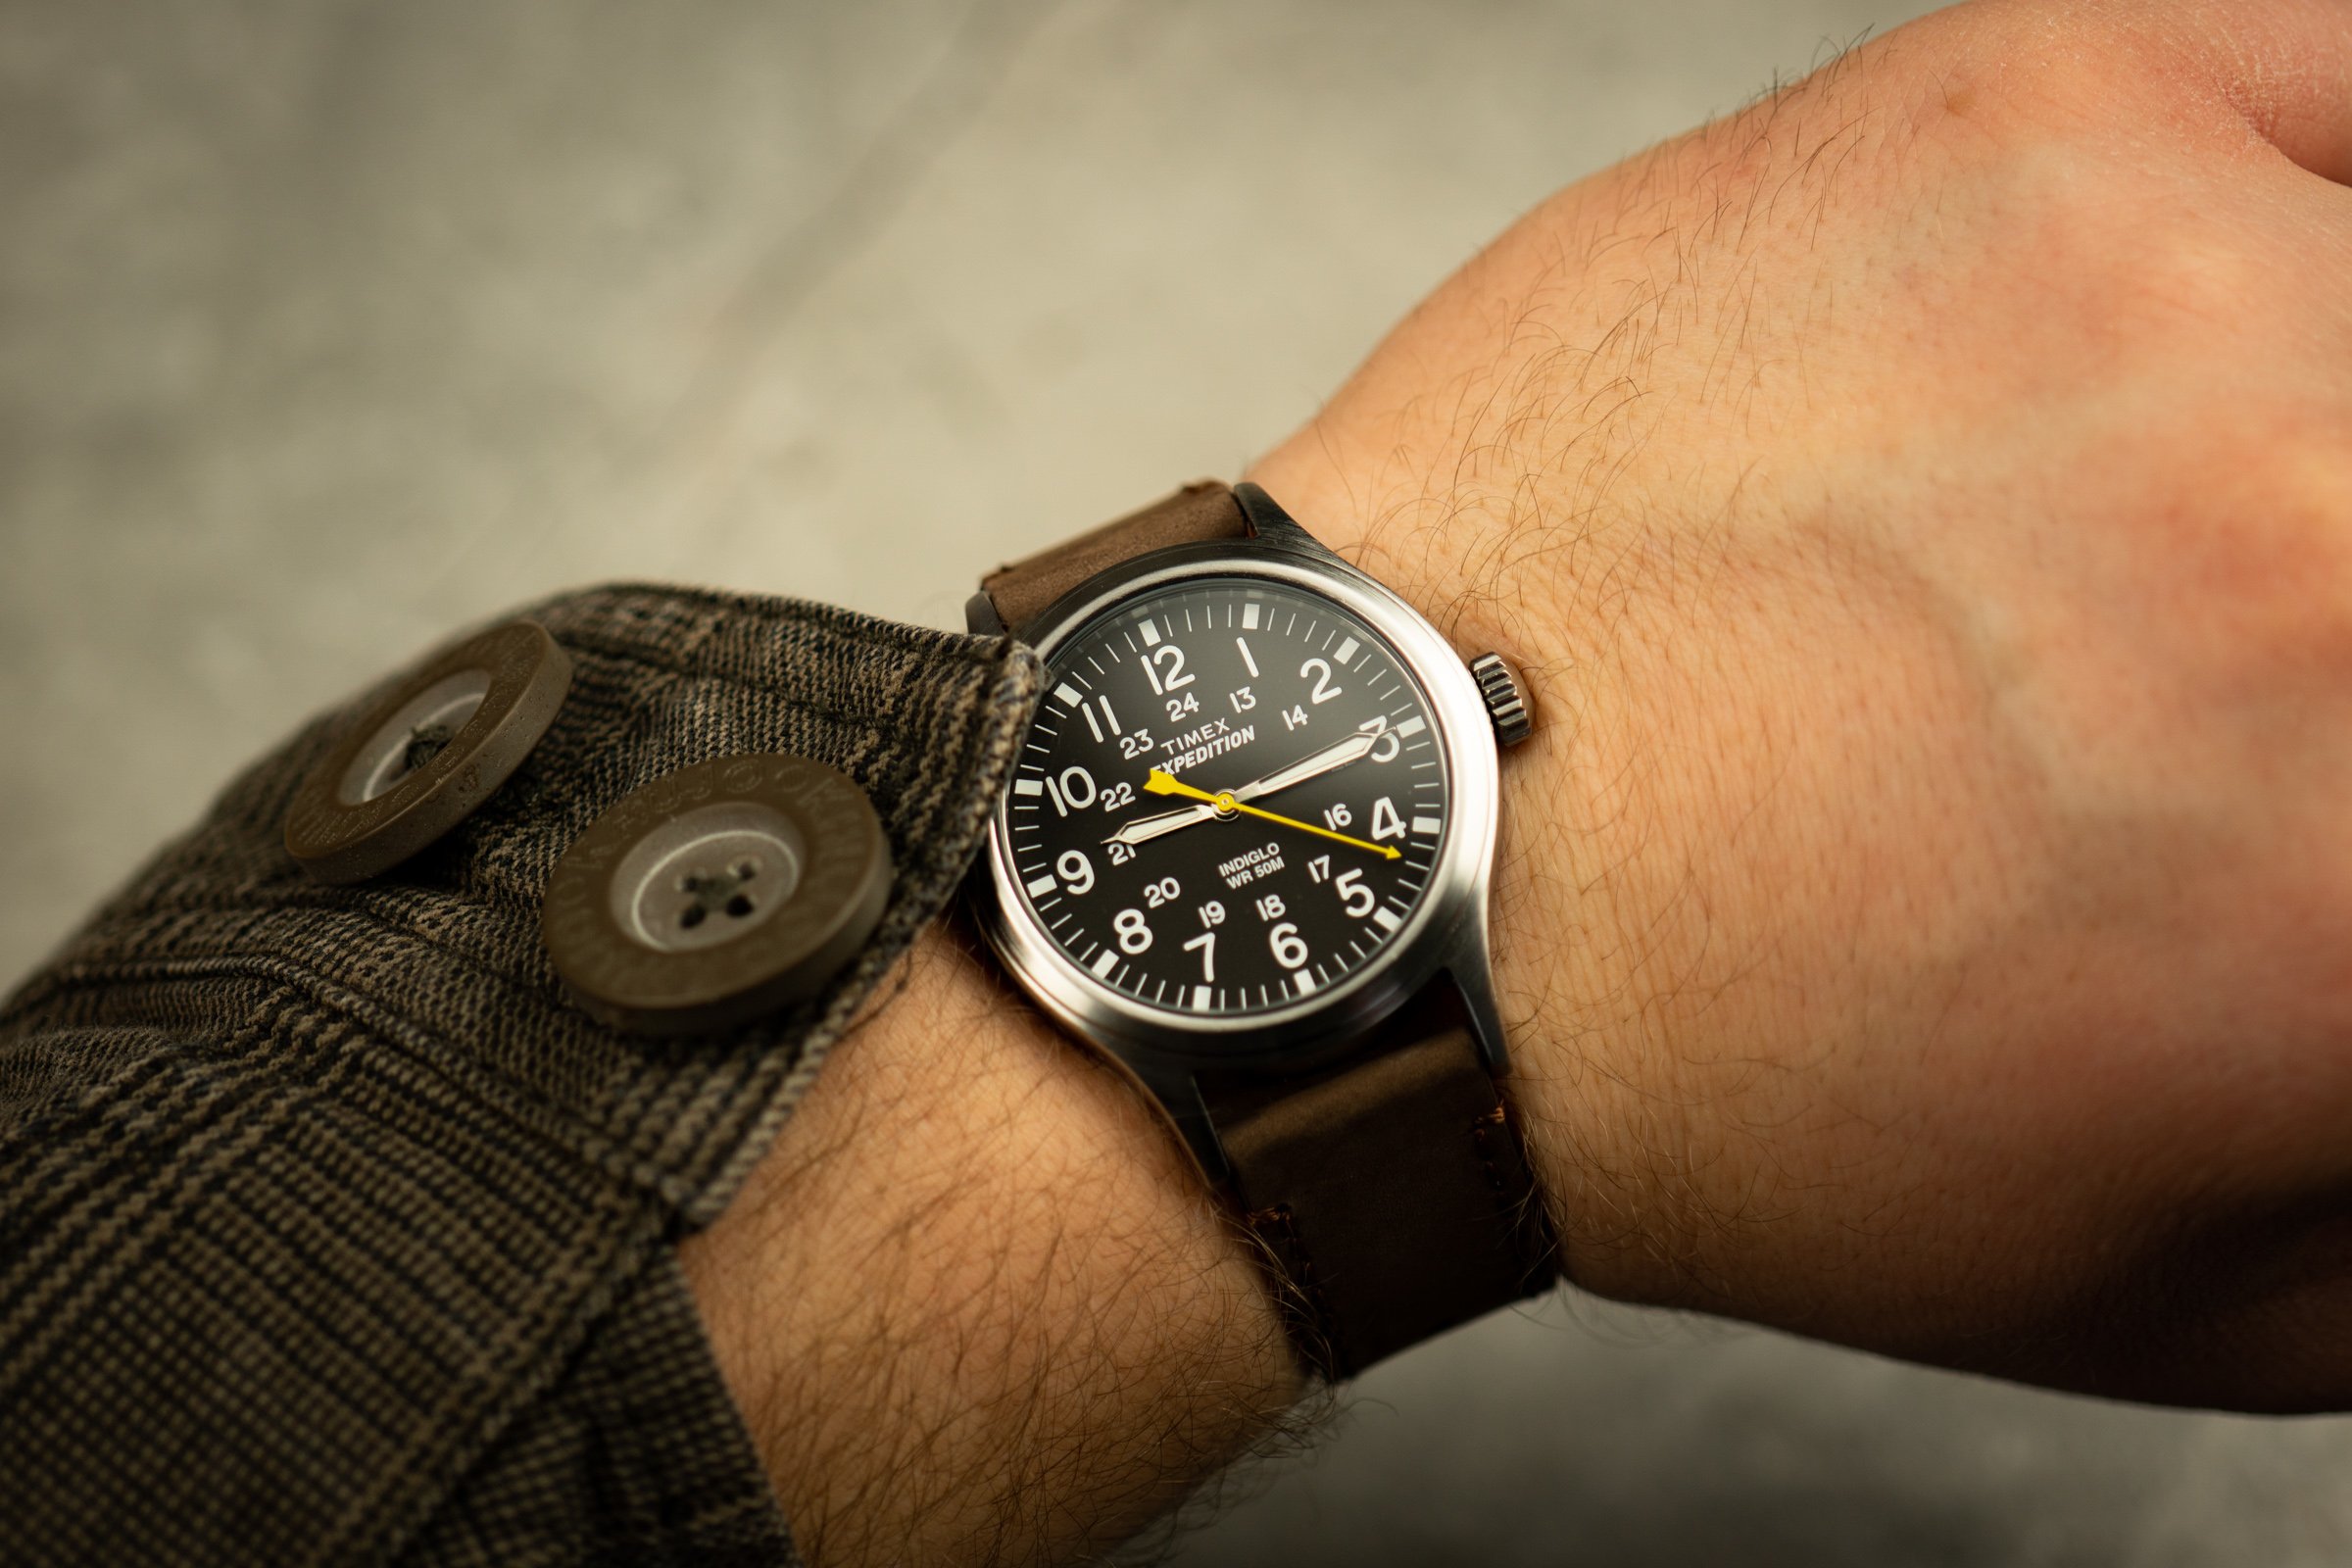 Timex-Expedition-Scout-Handgelenk